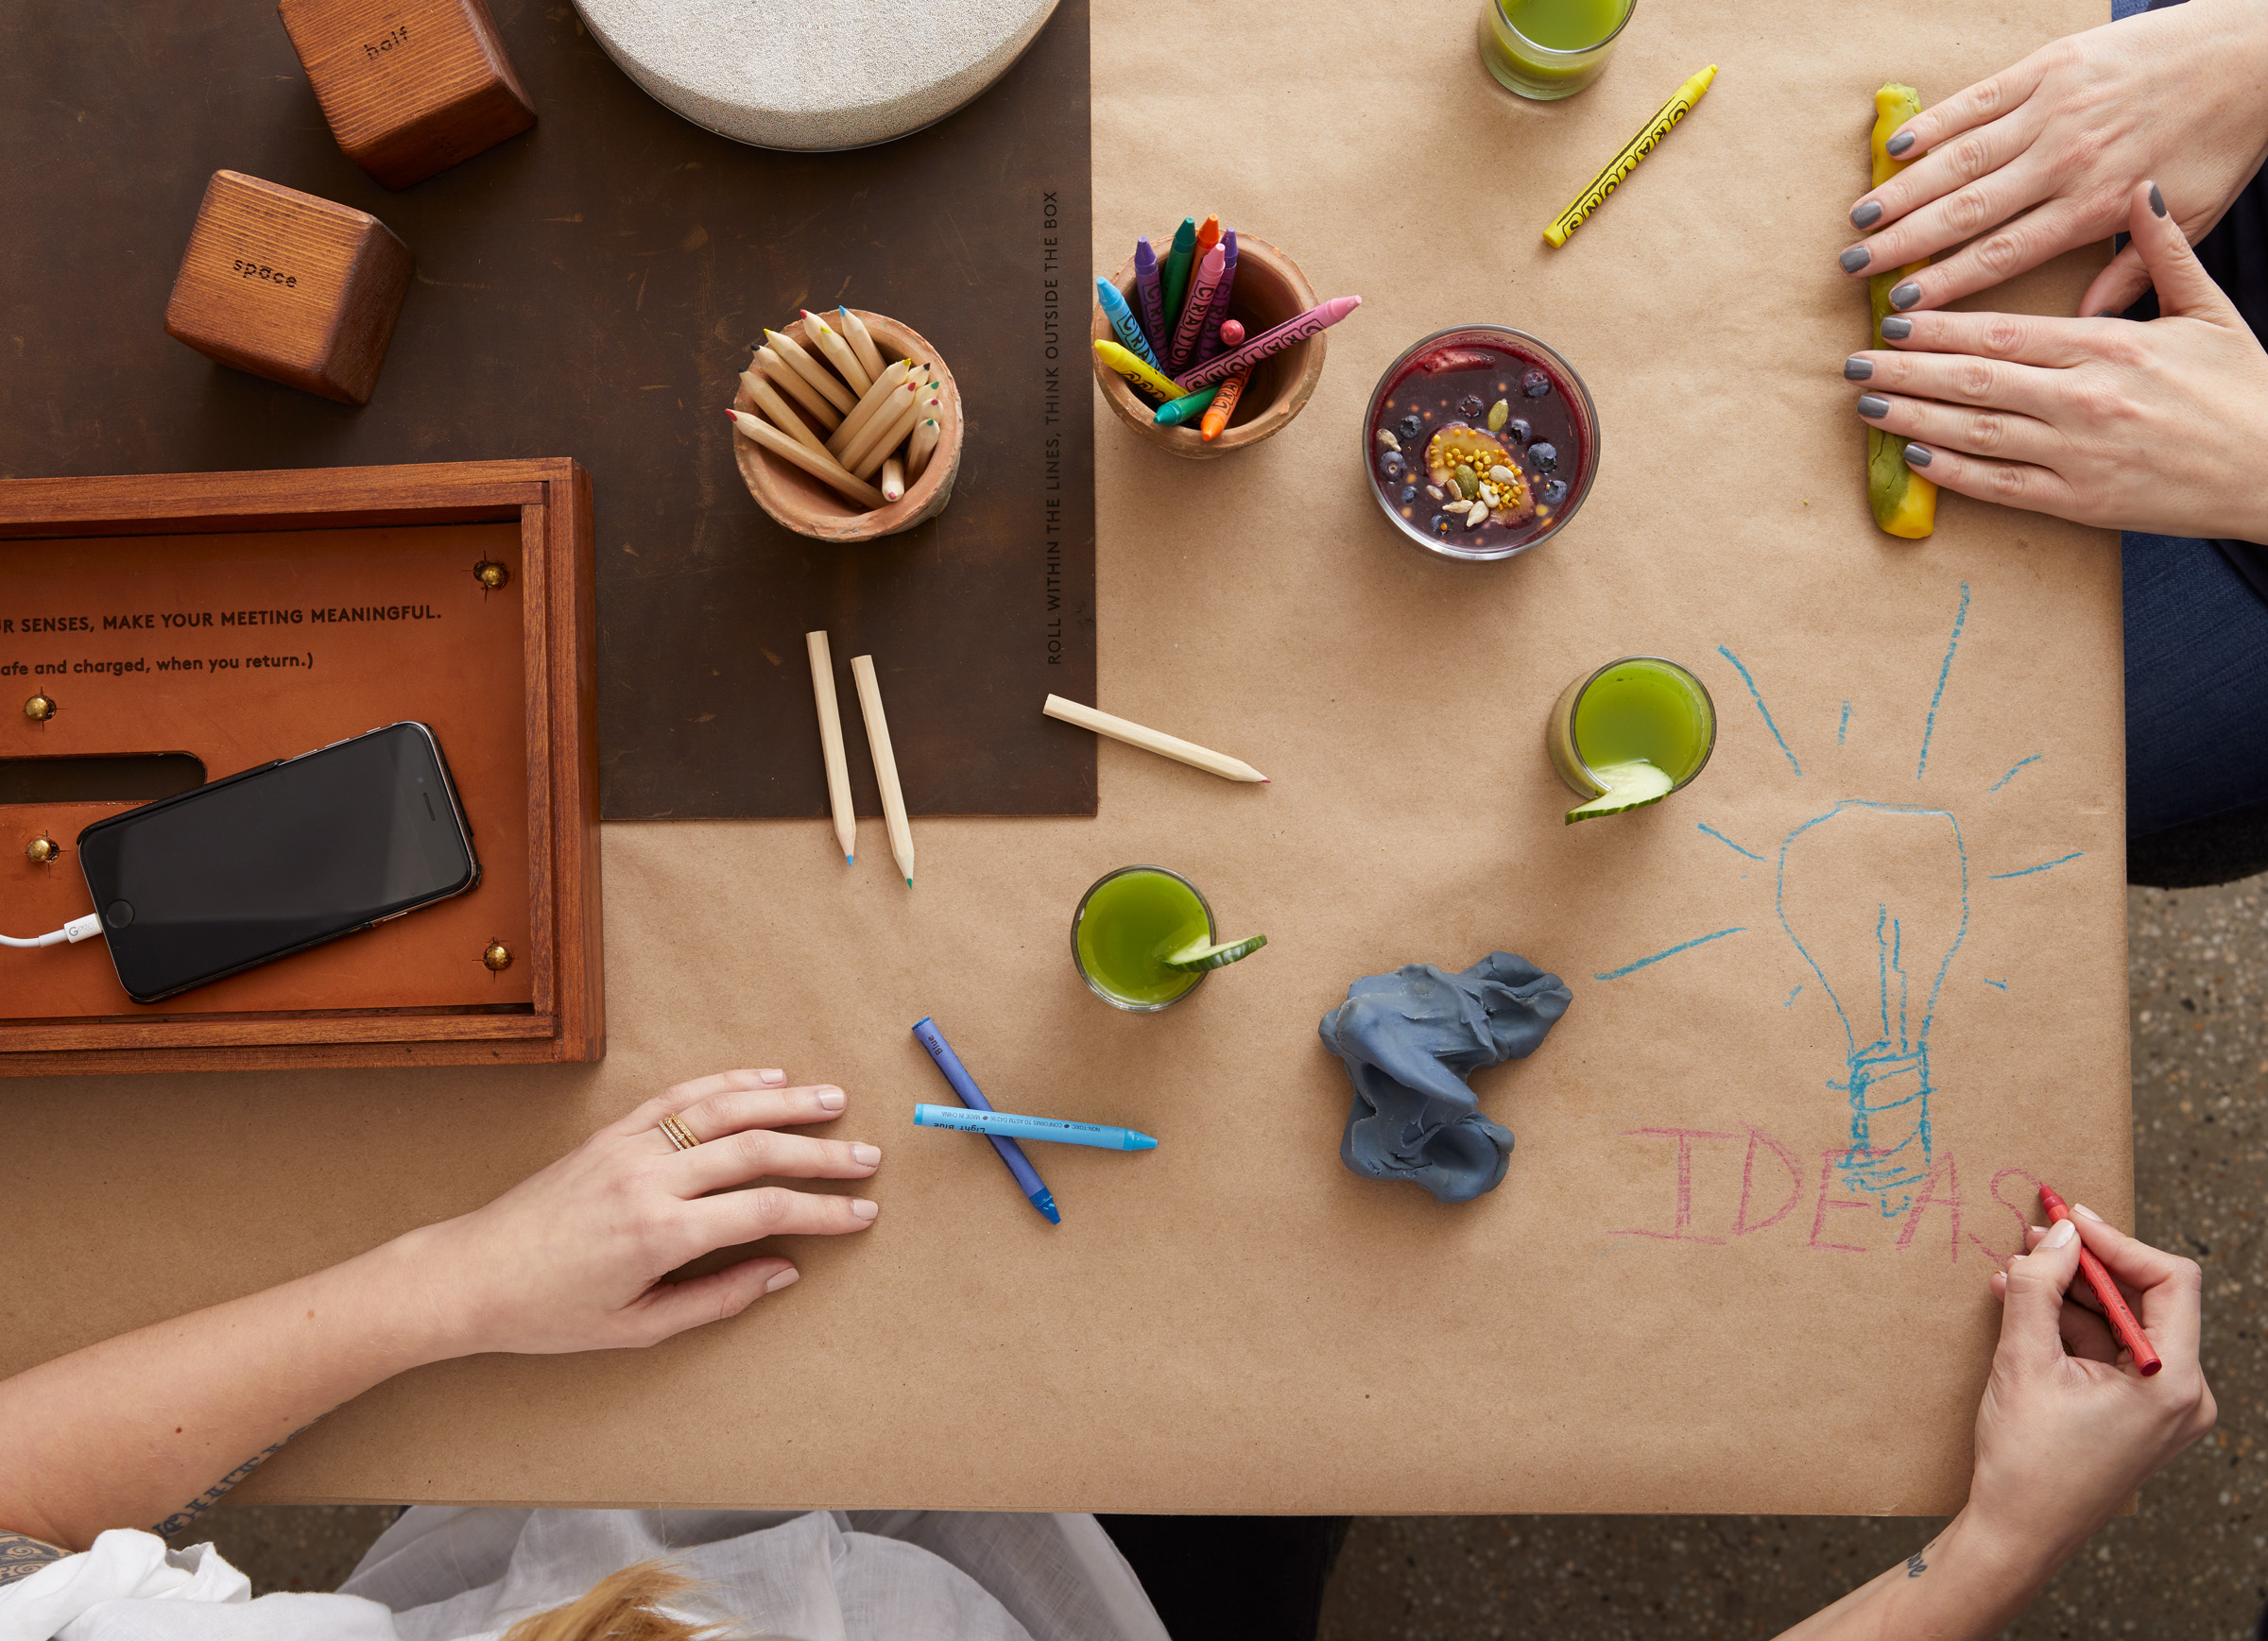 Two women at a crafting table with crayons and sculpting putty.